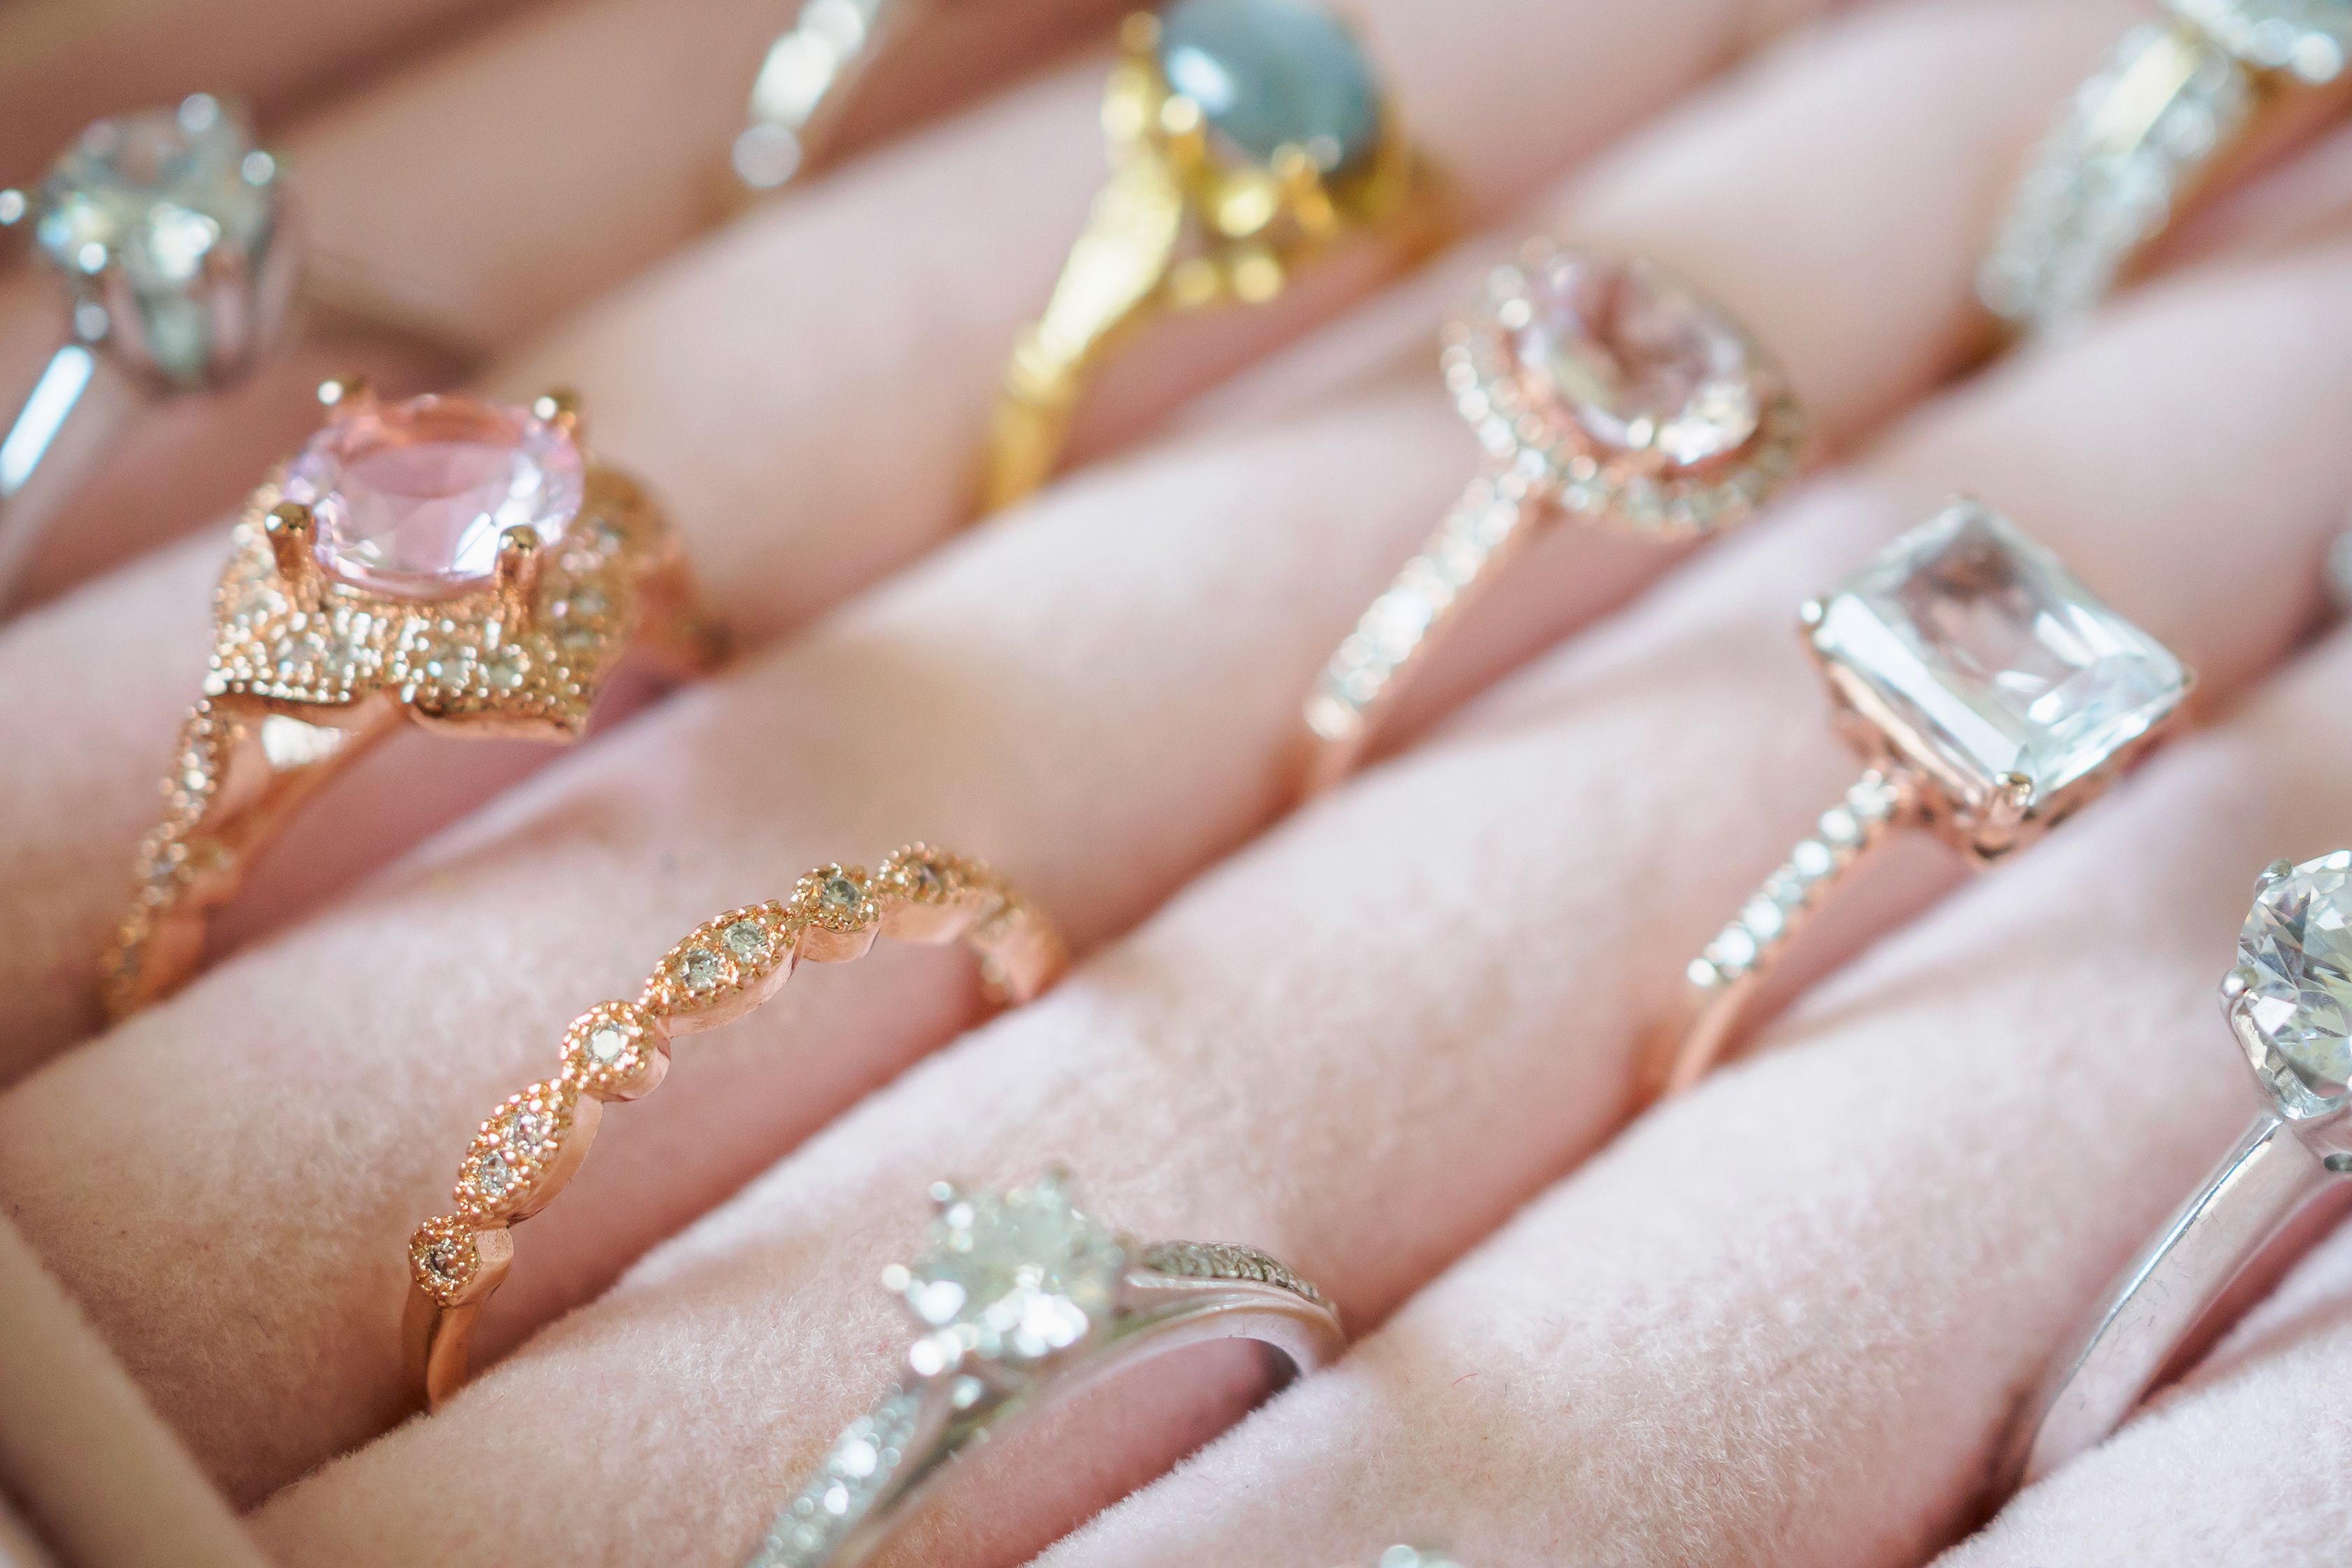 How to make a ring smaller, according 